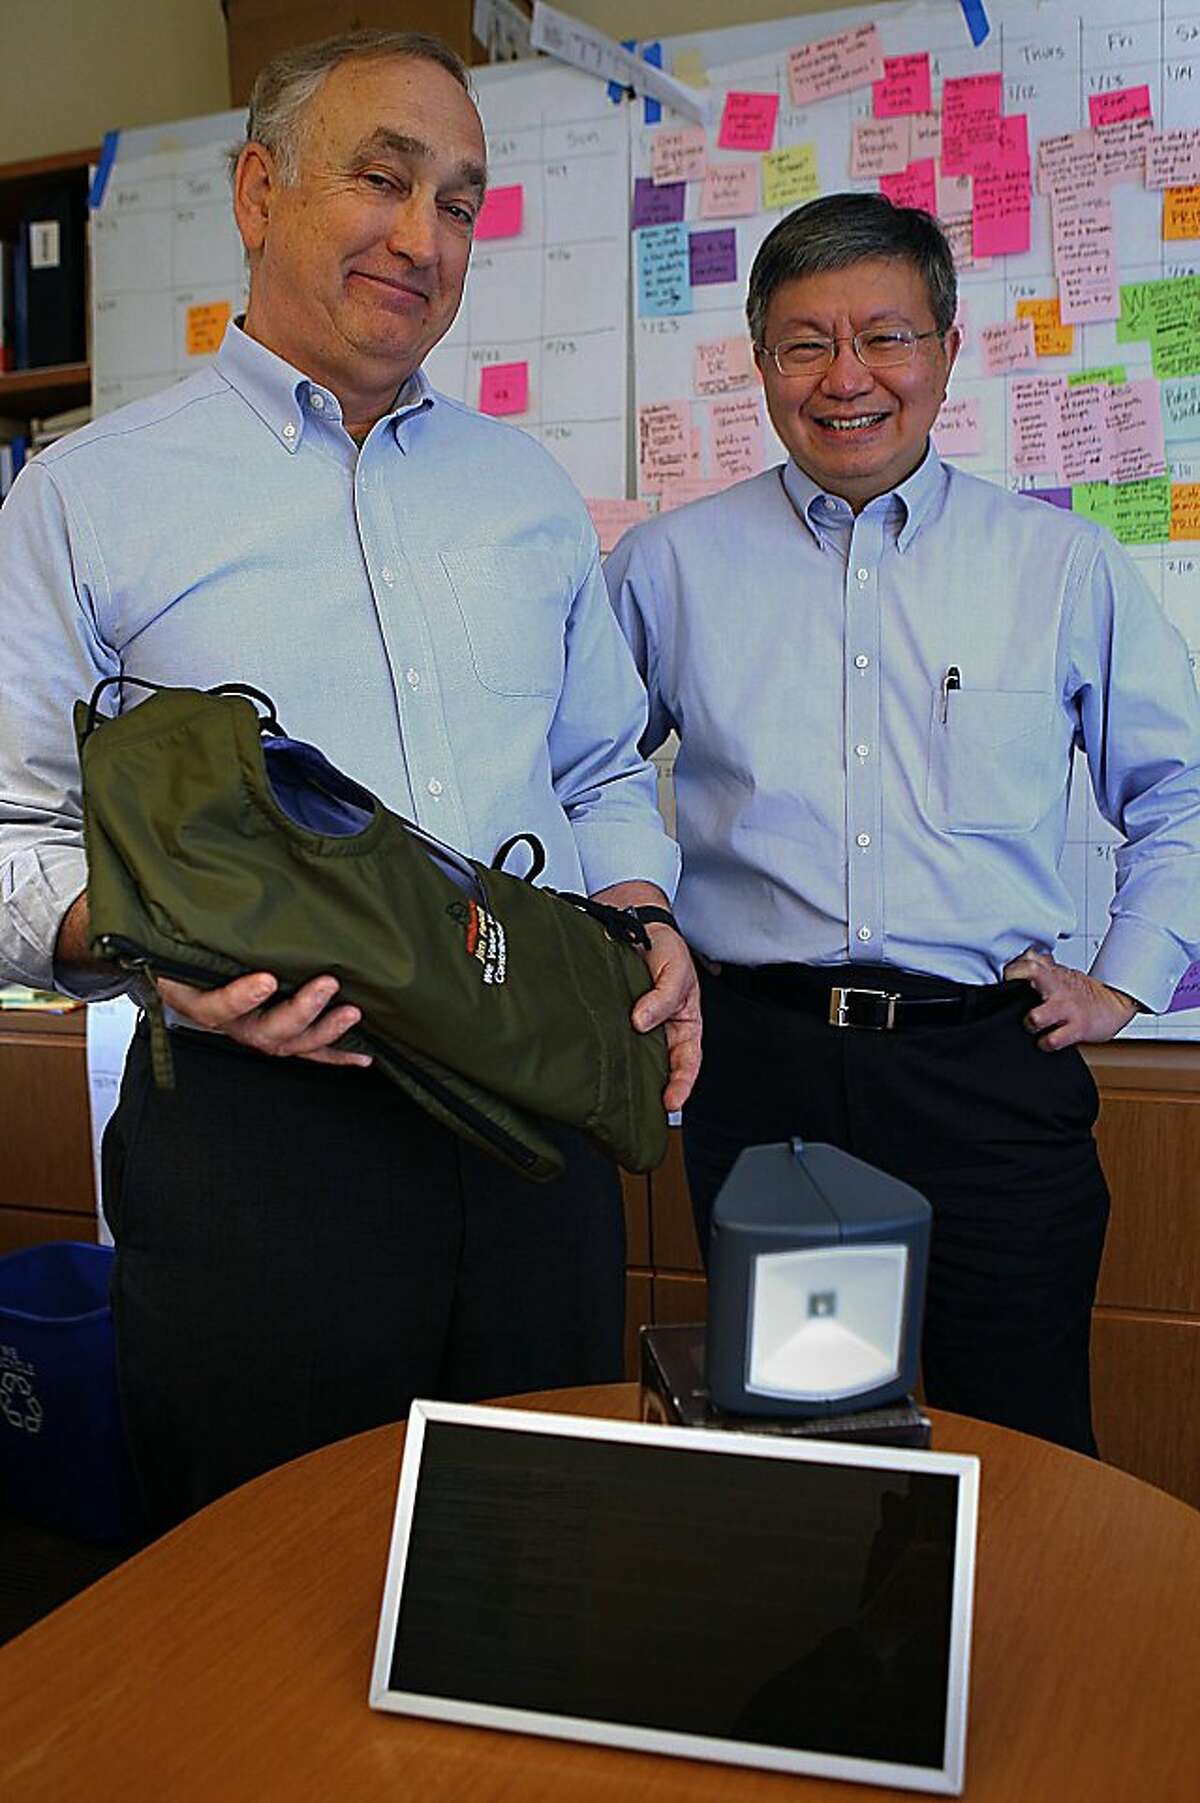 Faculty co-directors of the new institute James Patell (left) and Hau Lee (right) with two of their students ideas at the Knight Management Center on Stanford University in Palo Alto, Calif., on Thursday, November 3, 2011. Patell is carrying a baby warmer designed by alumni Jane Chen to be used as an incubator in impoverished countries, and in front is an early prototype of the d.light from alumni Sam Goldman and Ned Tozum to light villages using solar.